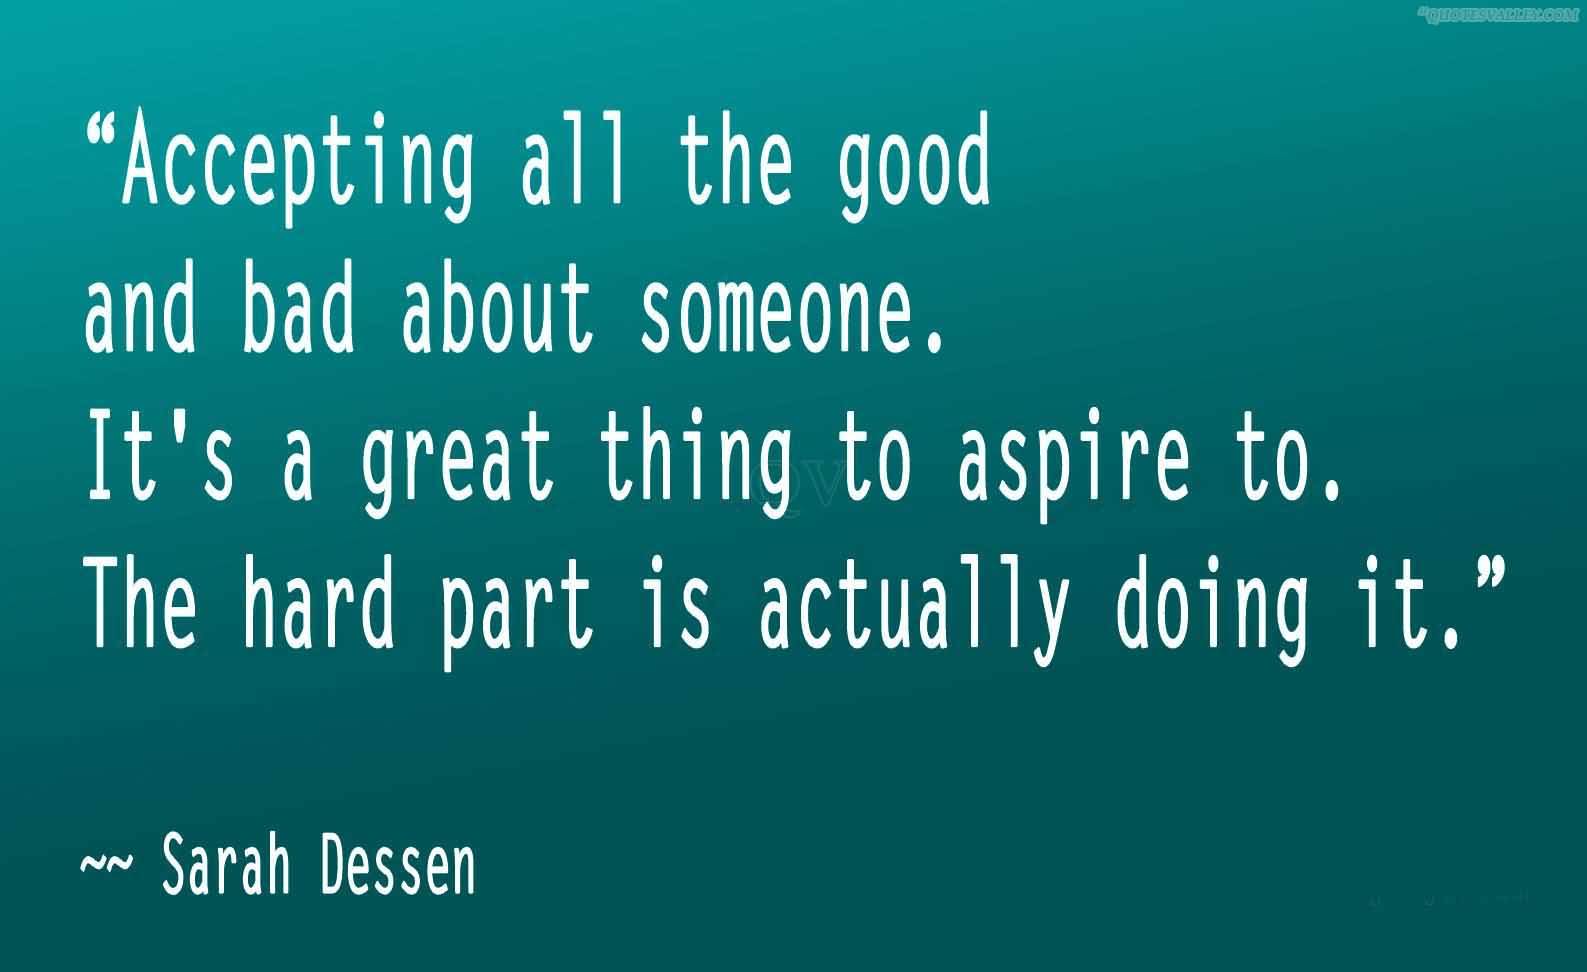 Accepting all the good and bad about someone. It's a great thing to aspire to. The hard part is actually doing it. Sarah Dessen